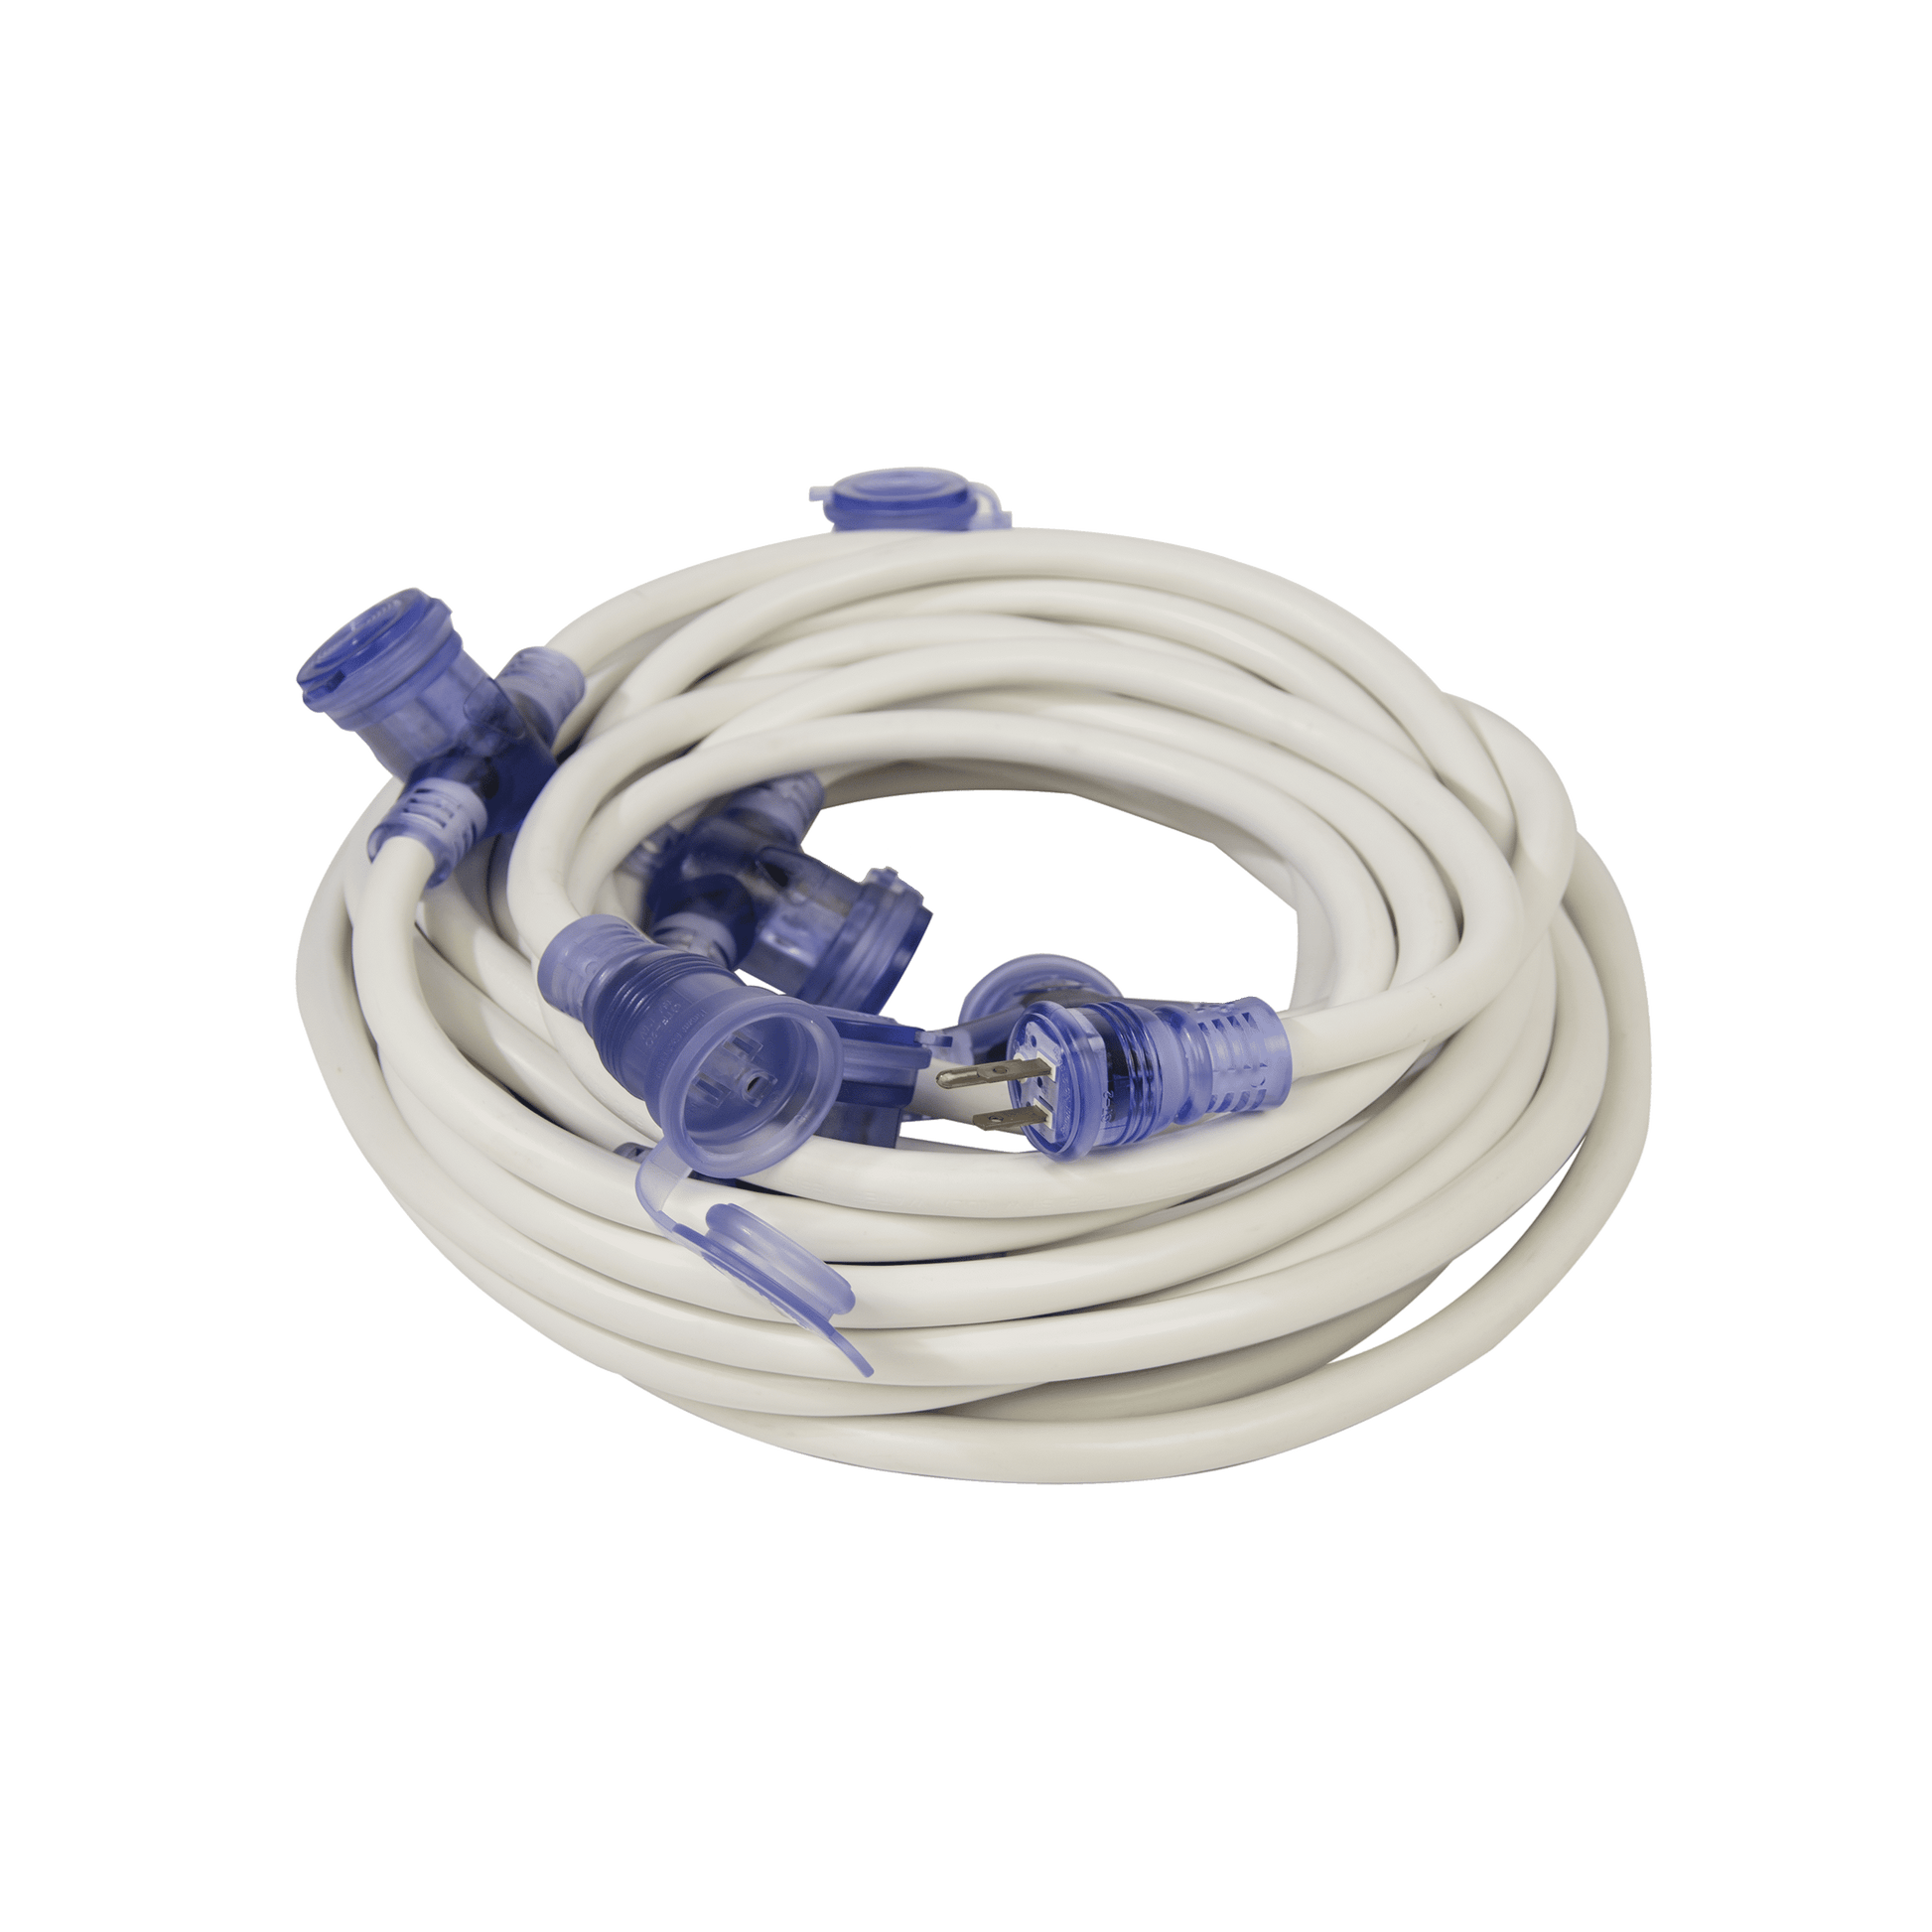 Electrical Extension Cord Cover With Duplex - 4 ft Long - Beige